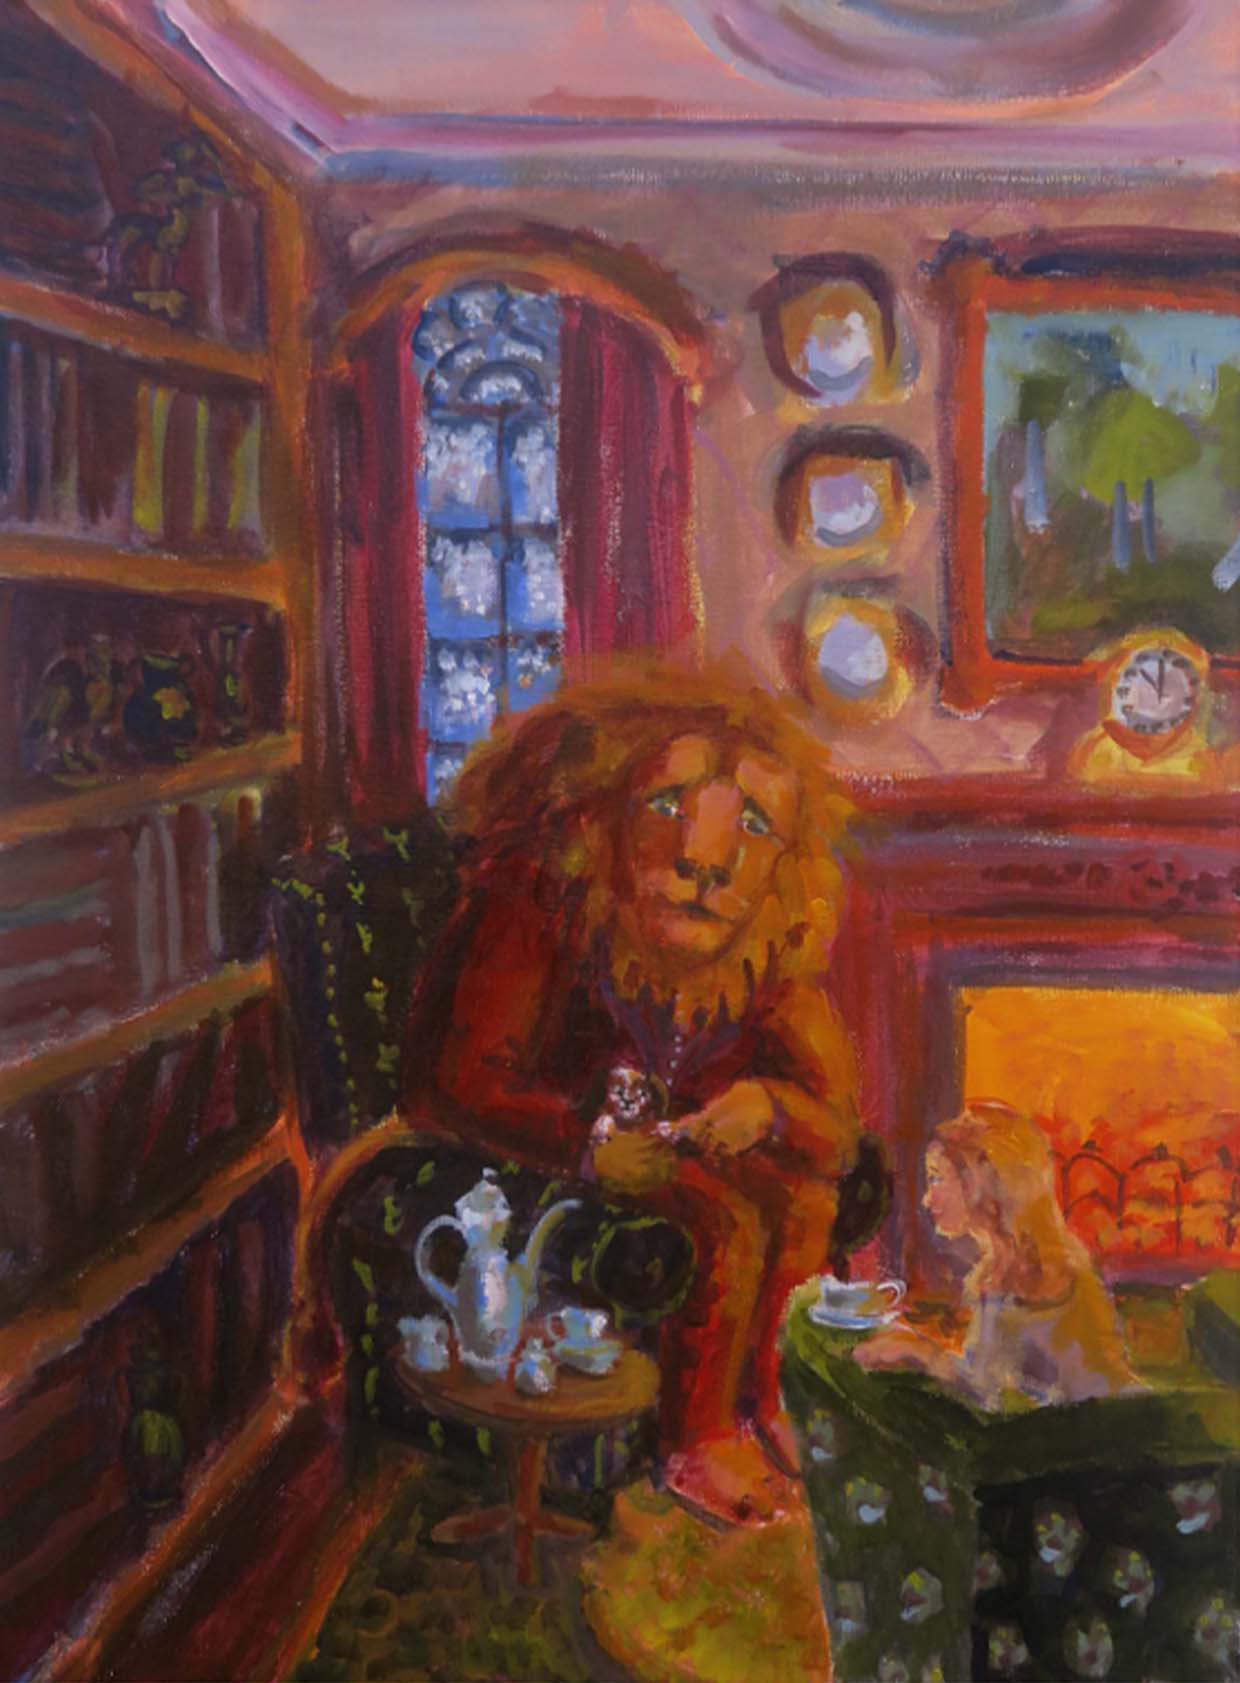 ‘By the Fireplace’. Part of a series I made based on ‘The Courtship of Mr Lyon’, by Angela Carter.